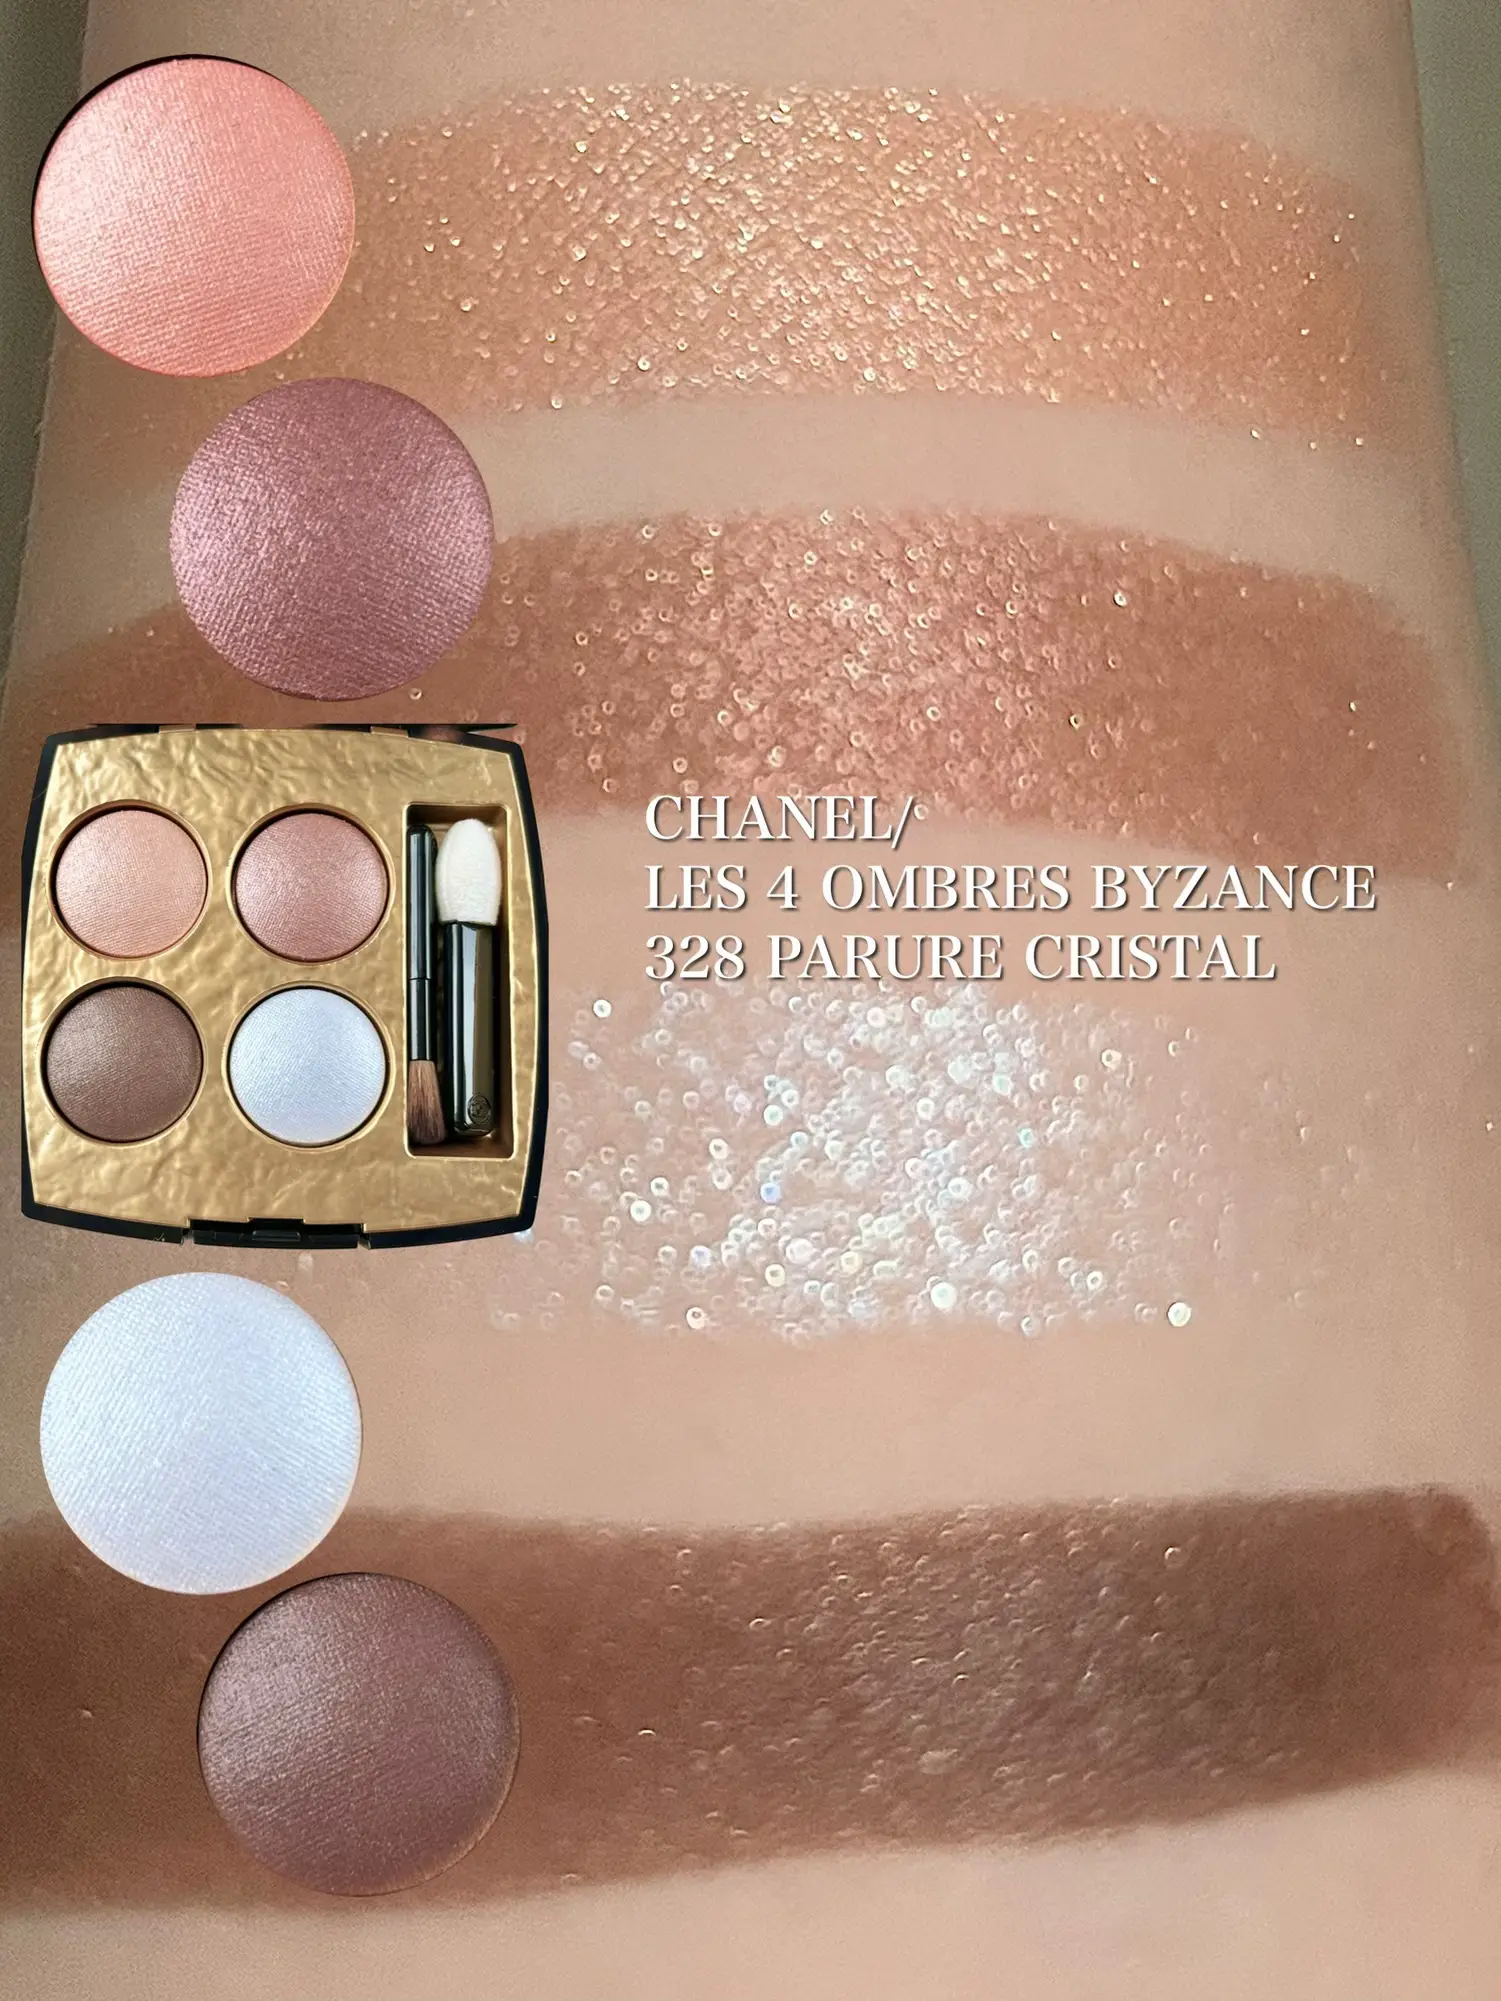 NEW CHANEL FALL 2023, Byzance Collection, Swatches